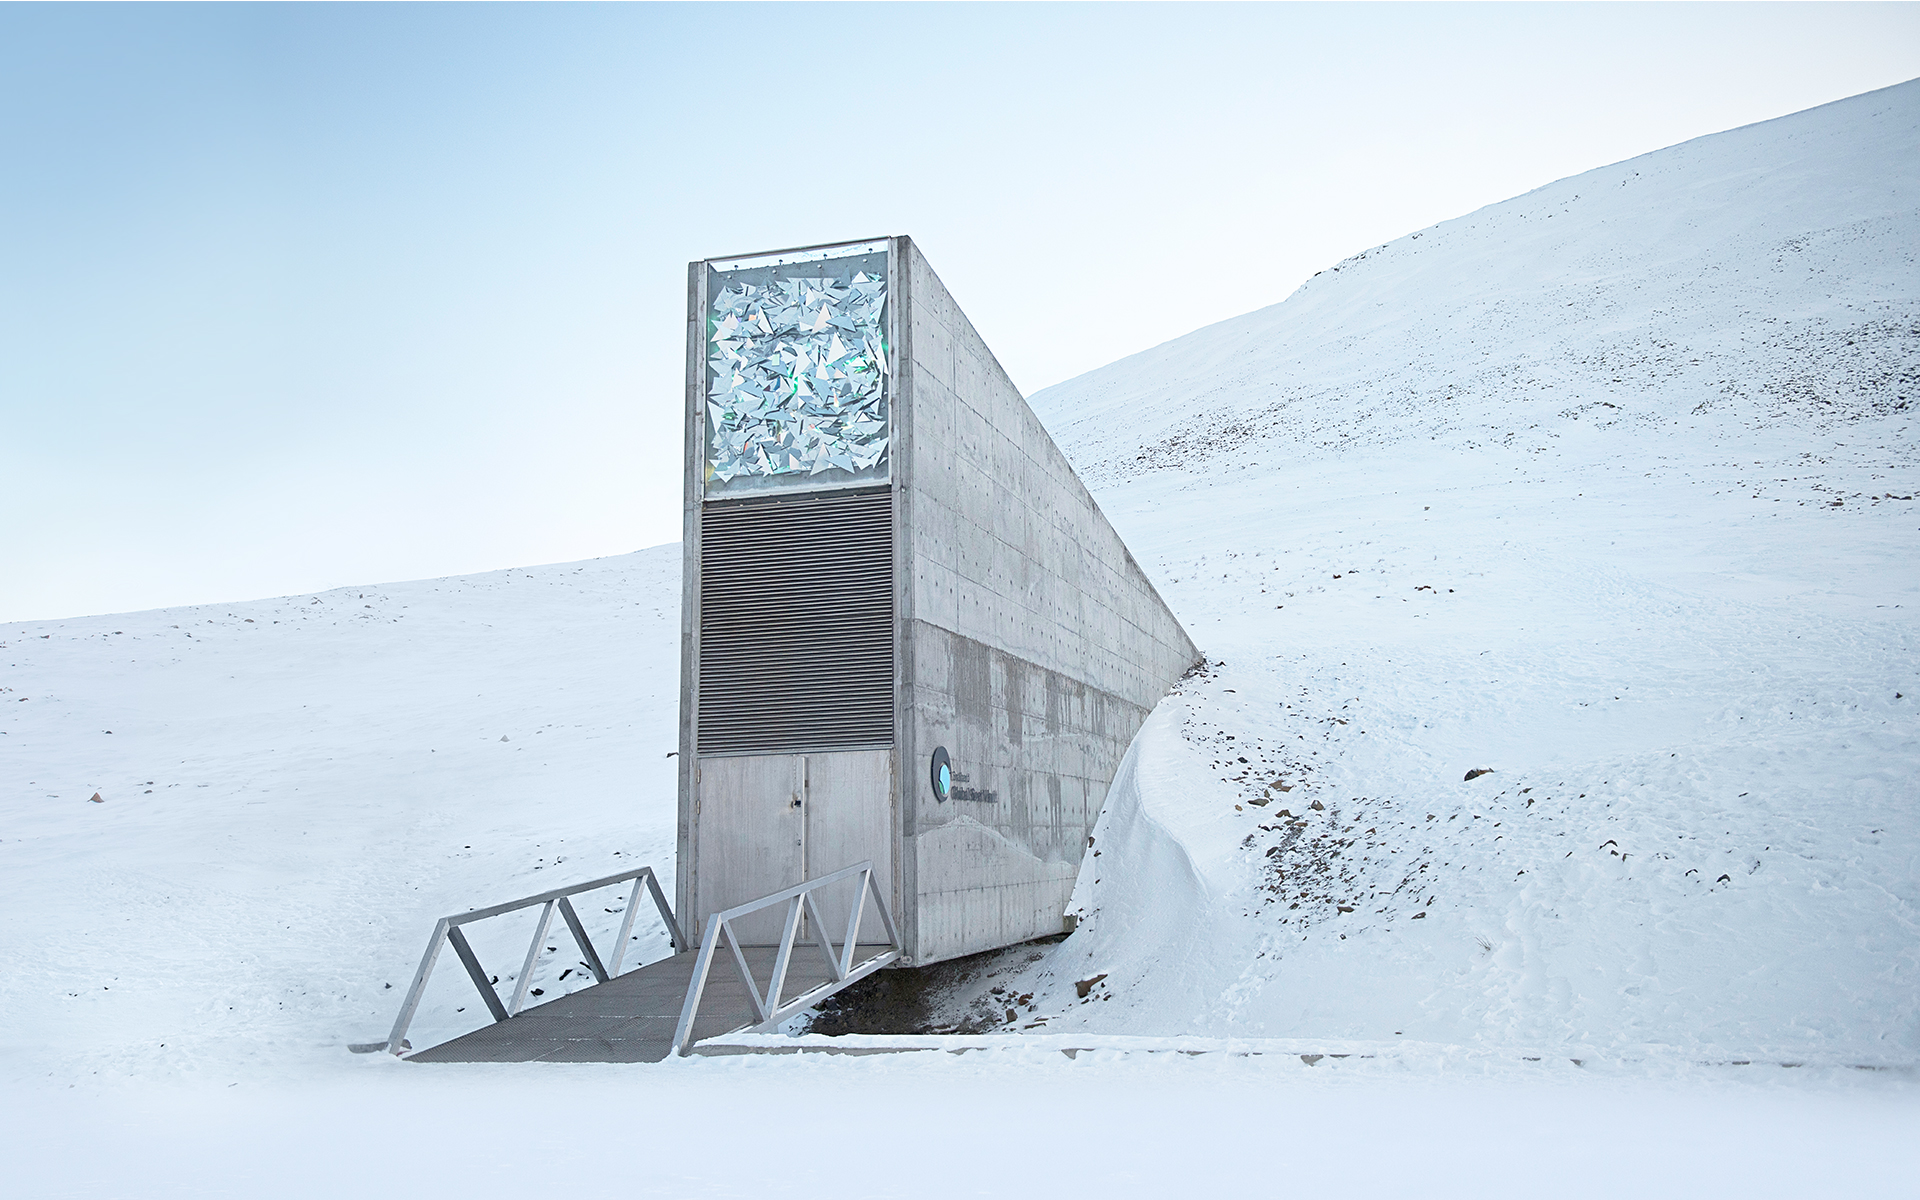 The Svalbard doomsday seed vault. Image: The Crop Trust